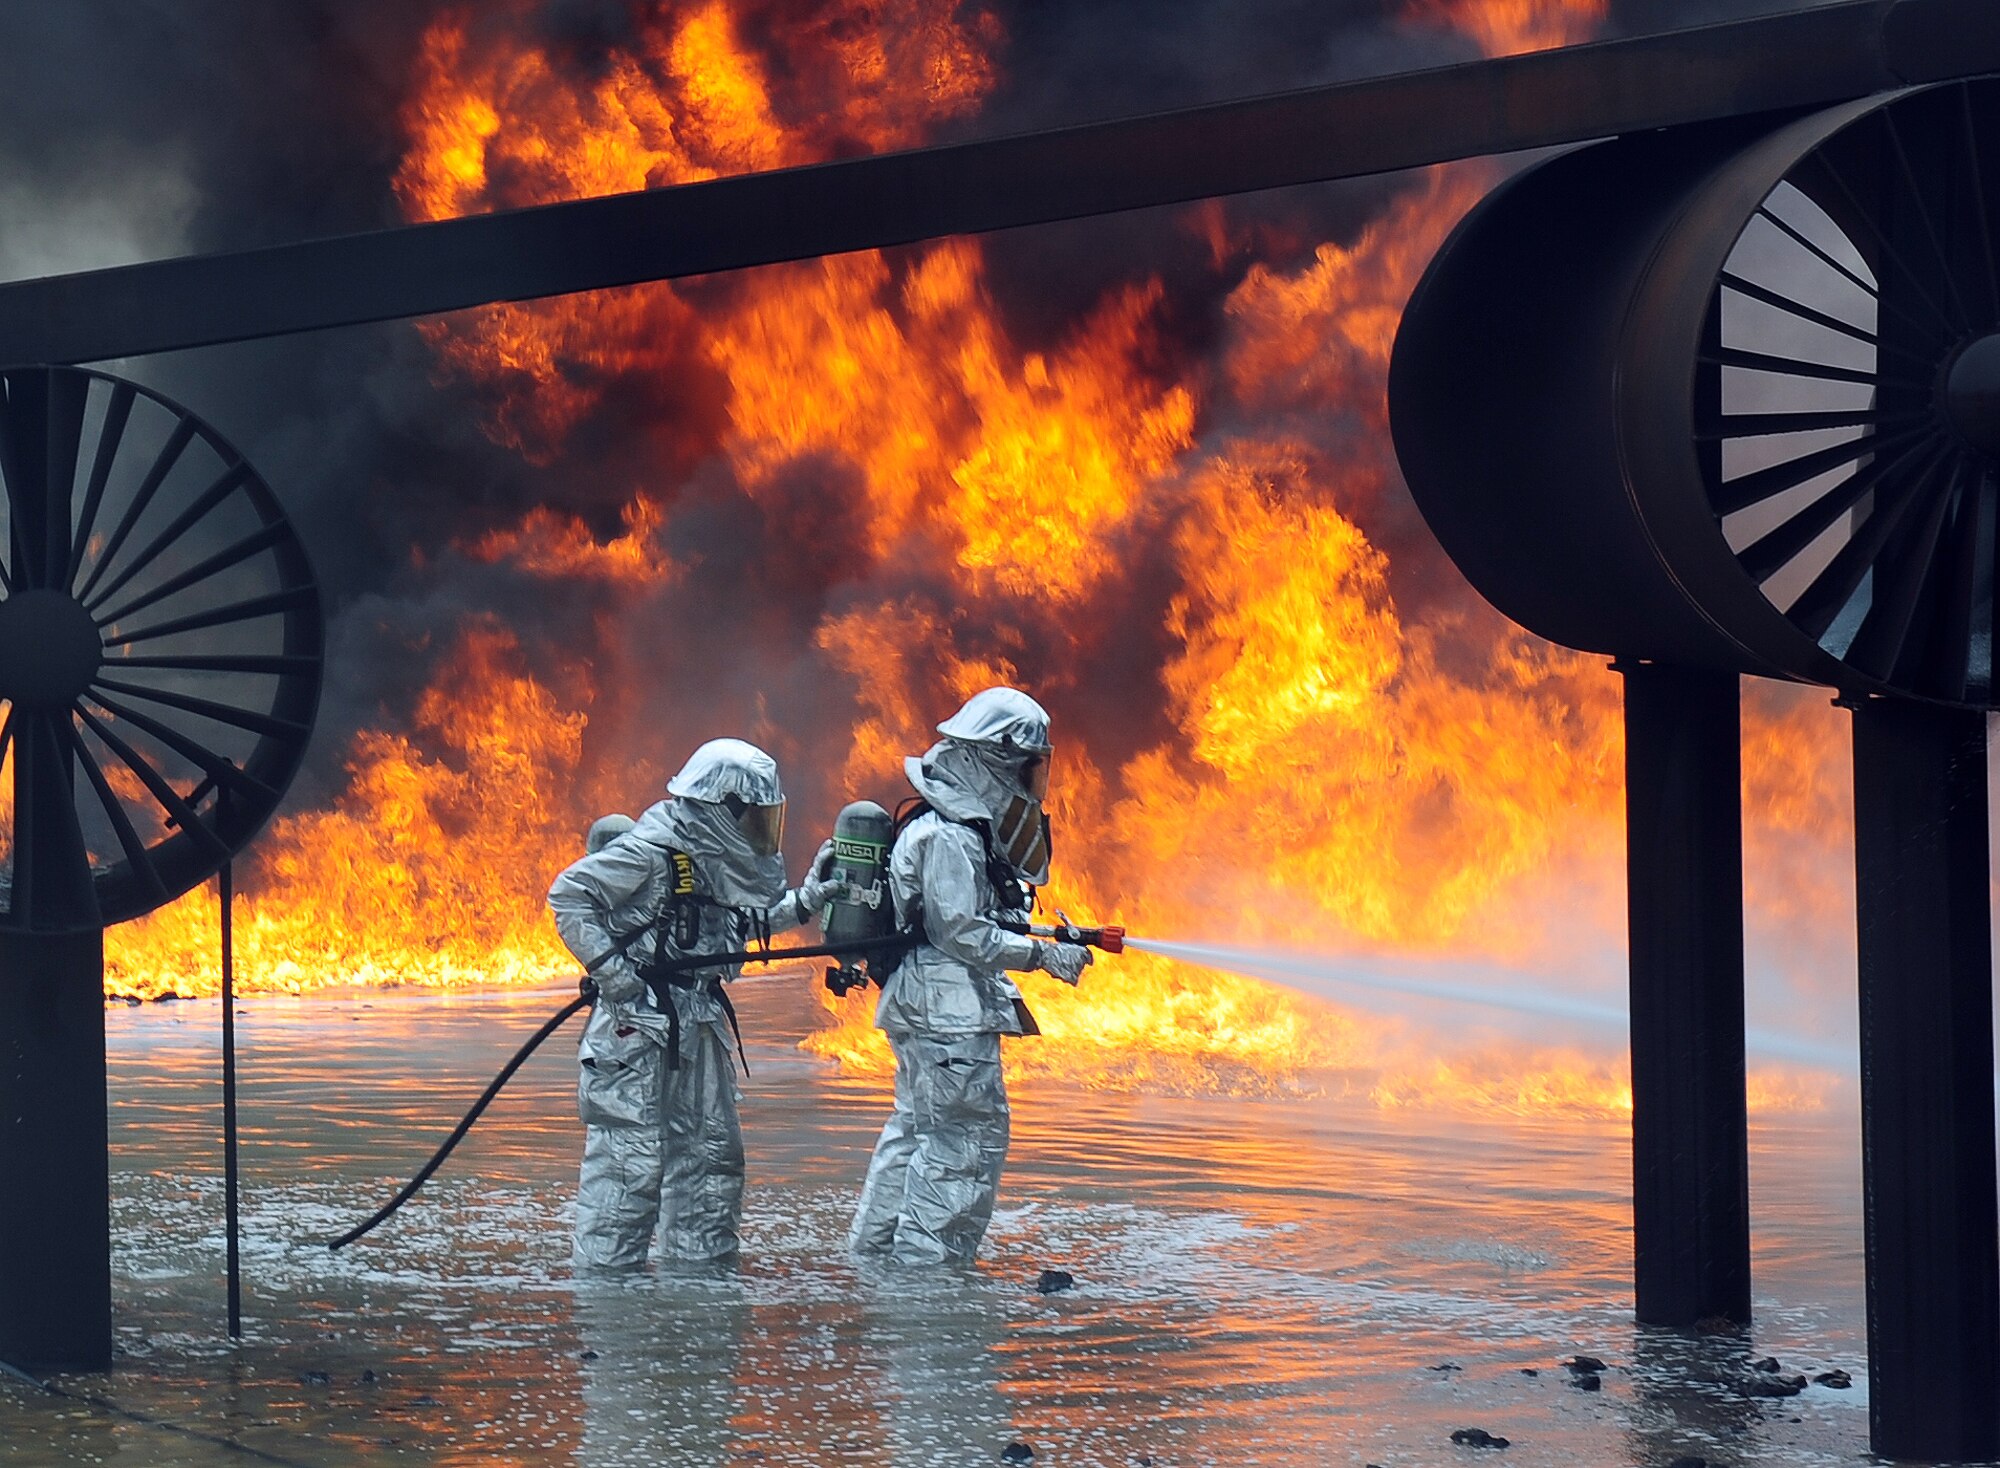 U.S. Air Force firefighters from the 7th Civil Engineer Squadron spray water onto a fire during a live fire training exercise April 2, 2014, at Dyess Air Force Base, Texas. In addition to wearing their fire proximity suits, firefighters must also wear self-contained breathing apparatus’ that provide a source of clean oxygen, enabling them to work in the presence of smoke or other super-heated gases.  (U.S. Air Force photo by Senior Airman Kia Atkins/Released)